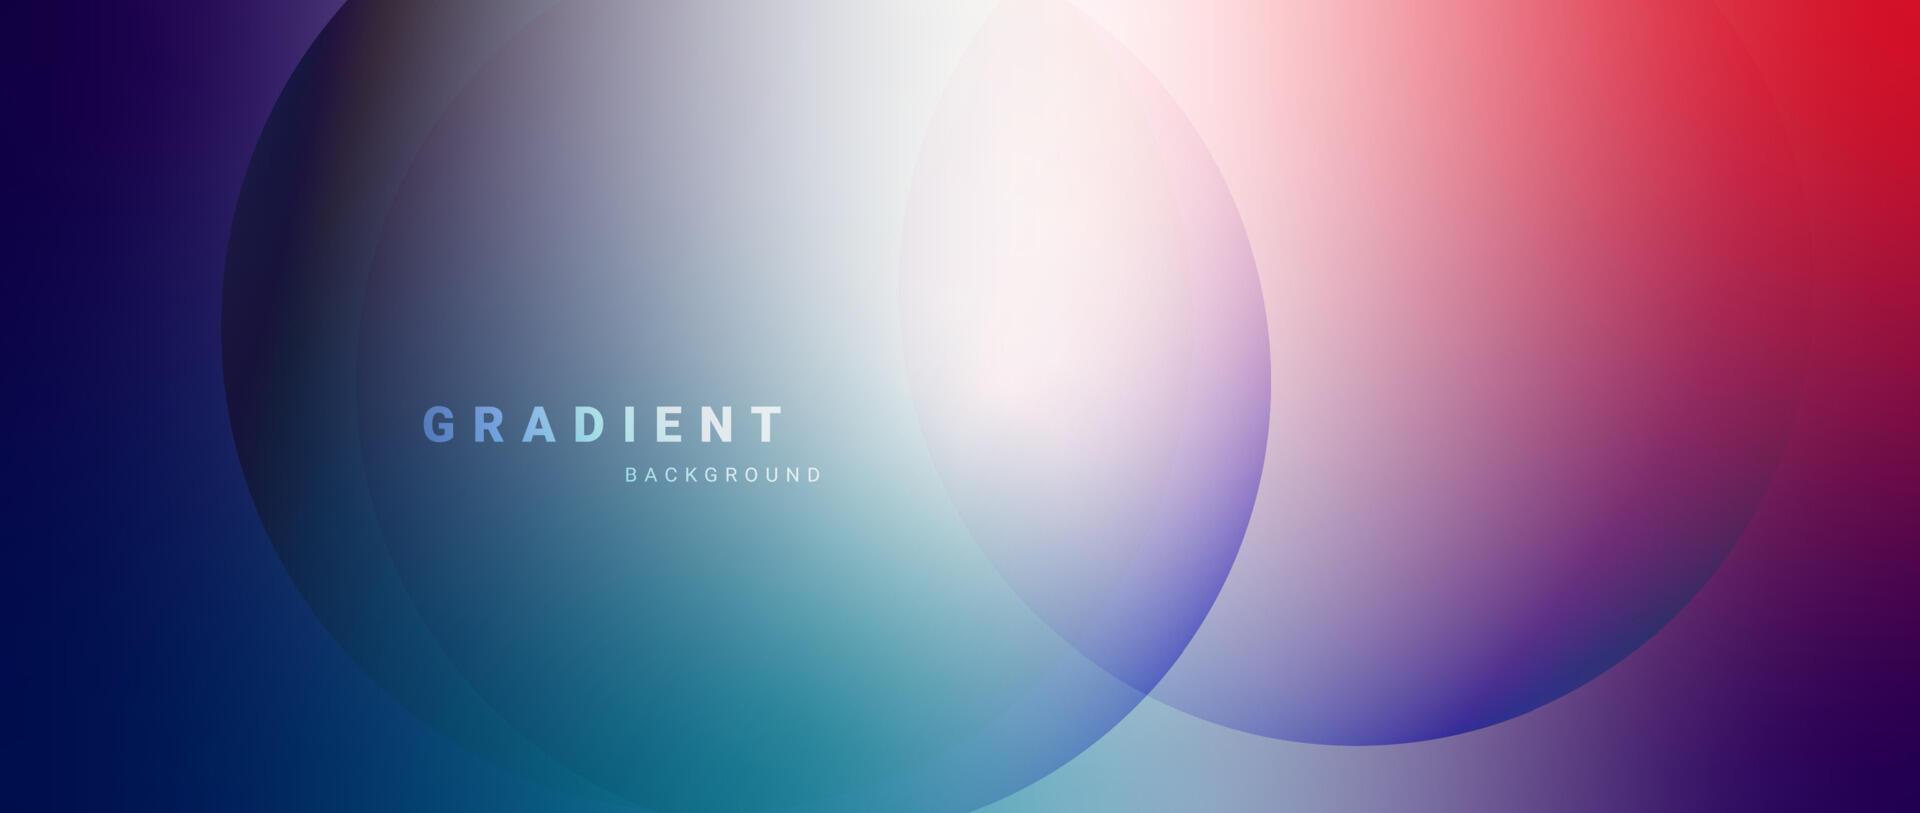 Abstract blurred color gradient background vector